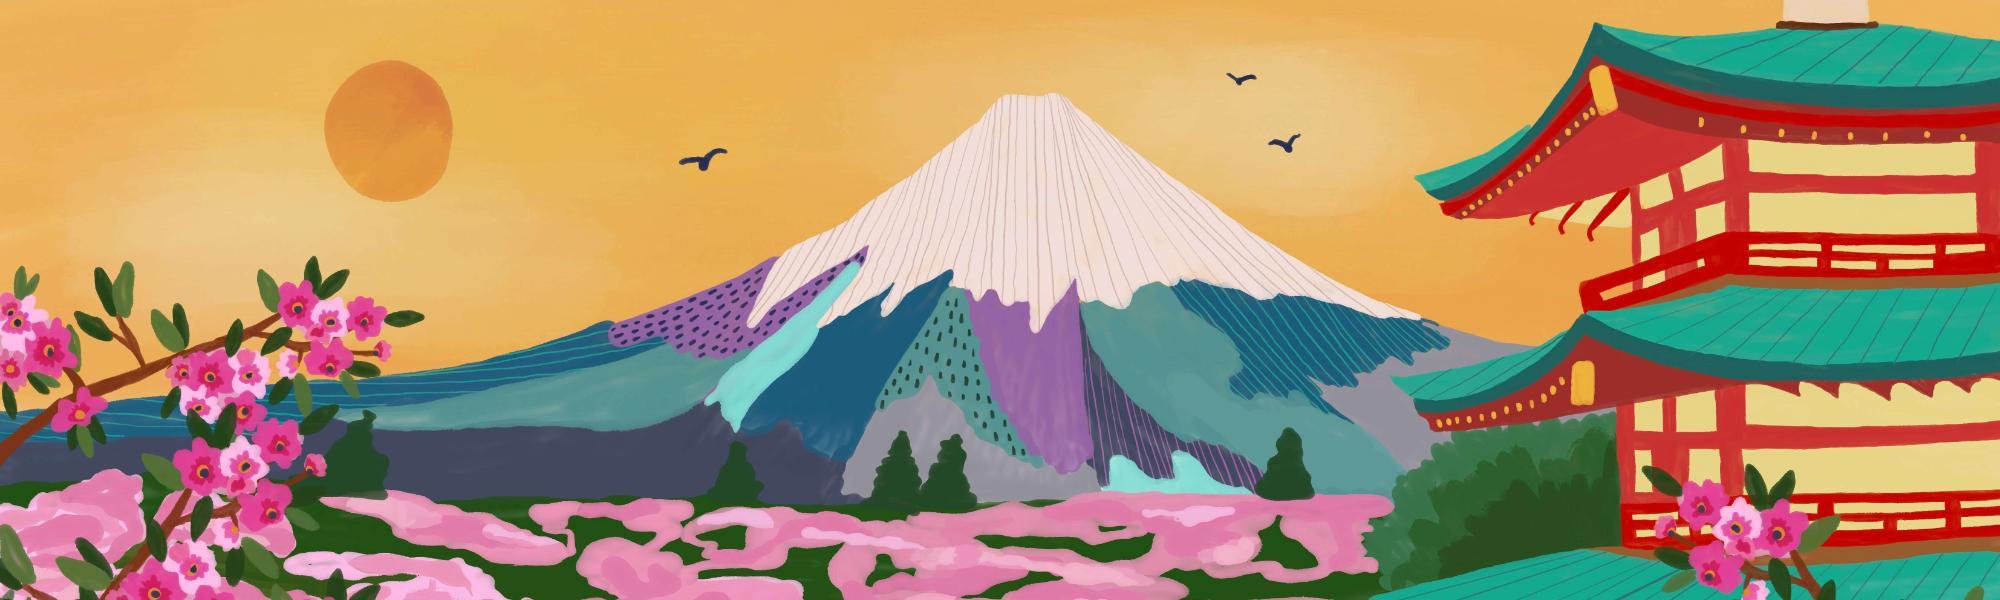 A brightly coloured illustration showing Mount Fuji and pink cherry blossom